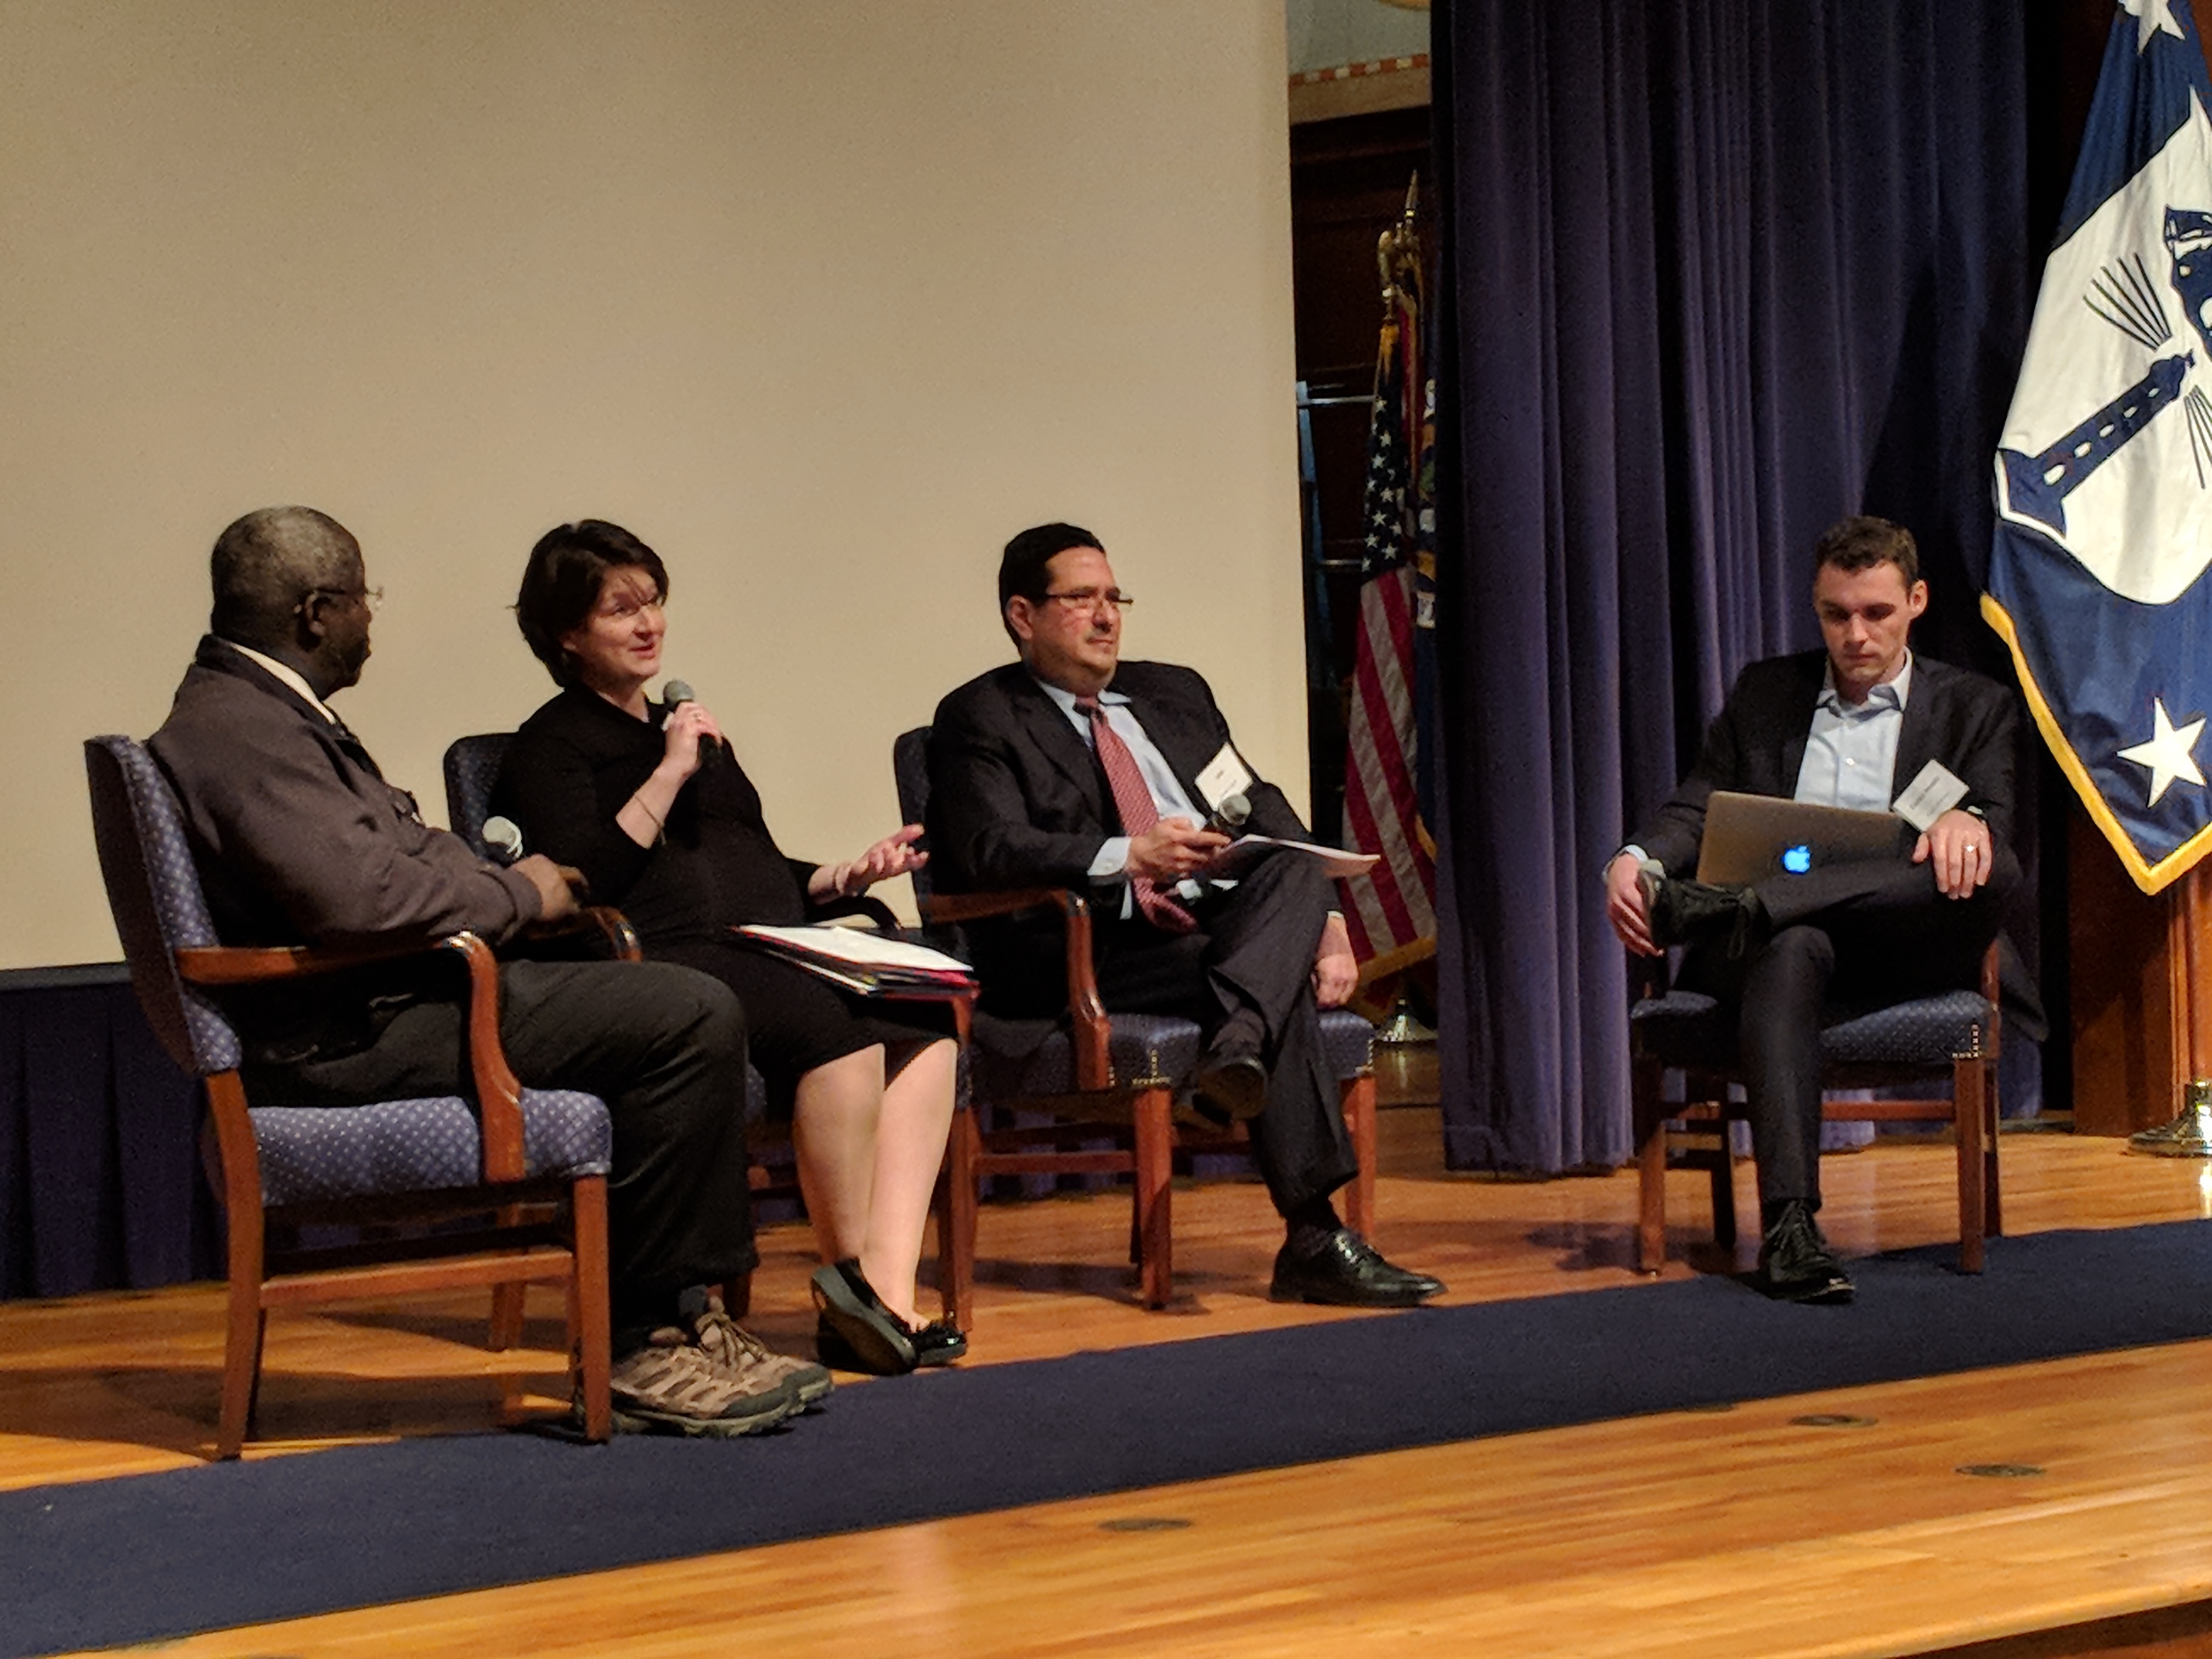 Commerce's National Technical Information Service (NTIS) hosts Data Innovation Day on March 22, 2018. Dr. Henry "Skip" Francis, FDA, Director of the Data Mining and Informatics and Evaluation Research Group in the Office of Translational Sciences (Left); Dr. Caryl Brzymialkiewicz, HHS OIG, Chief Data Officer; David Vargas, OPM, Associate Chief Information Officer, Strategy and Policy; and moderator, Dr. Zach Whitman, U.S. Census Bureau, Chief Data Officer (Right)